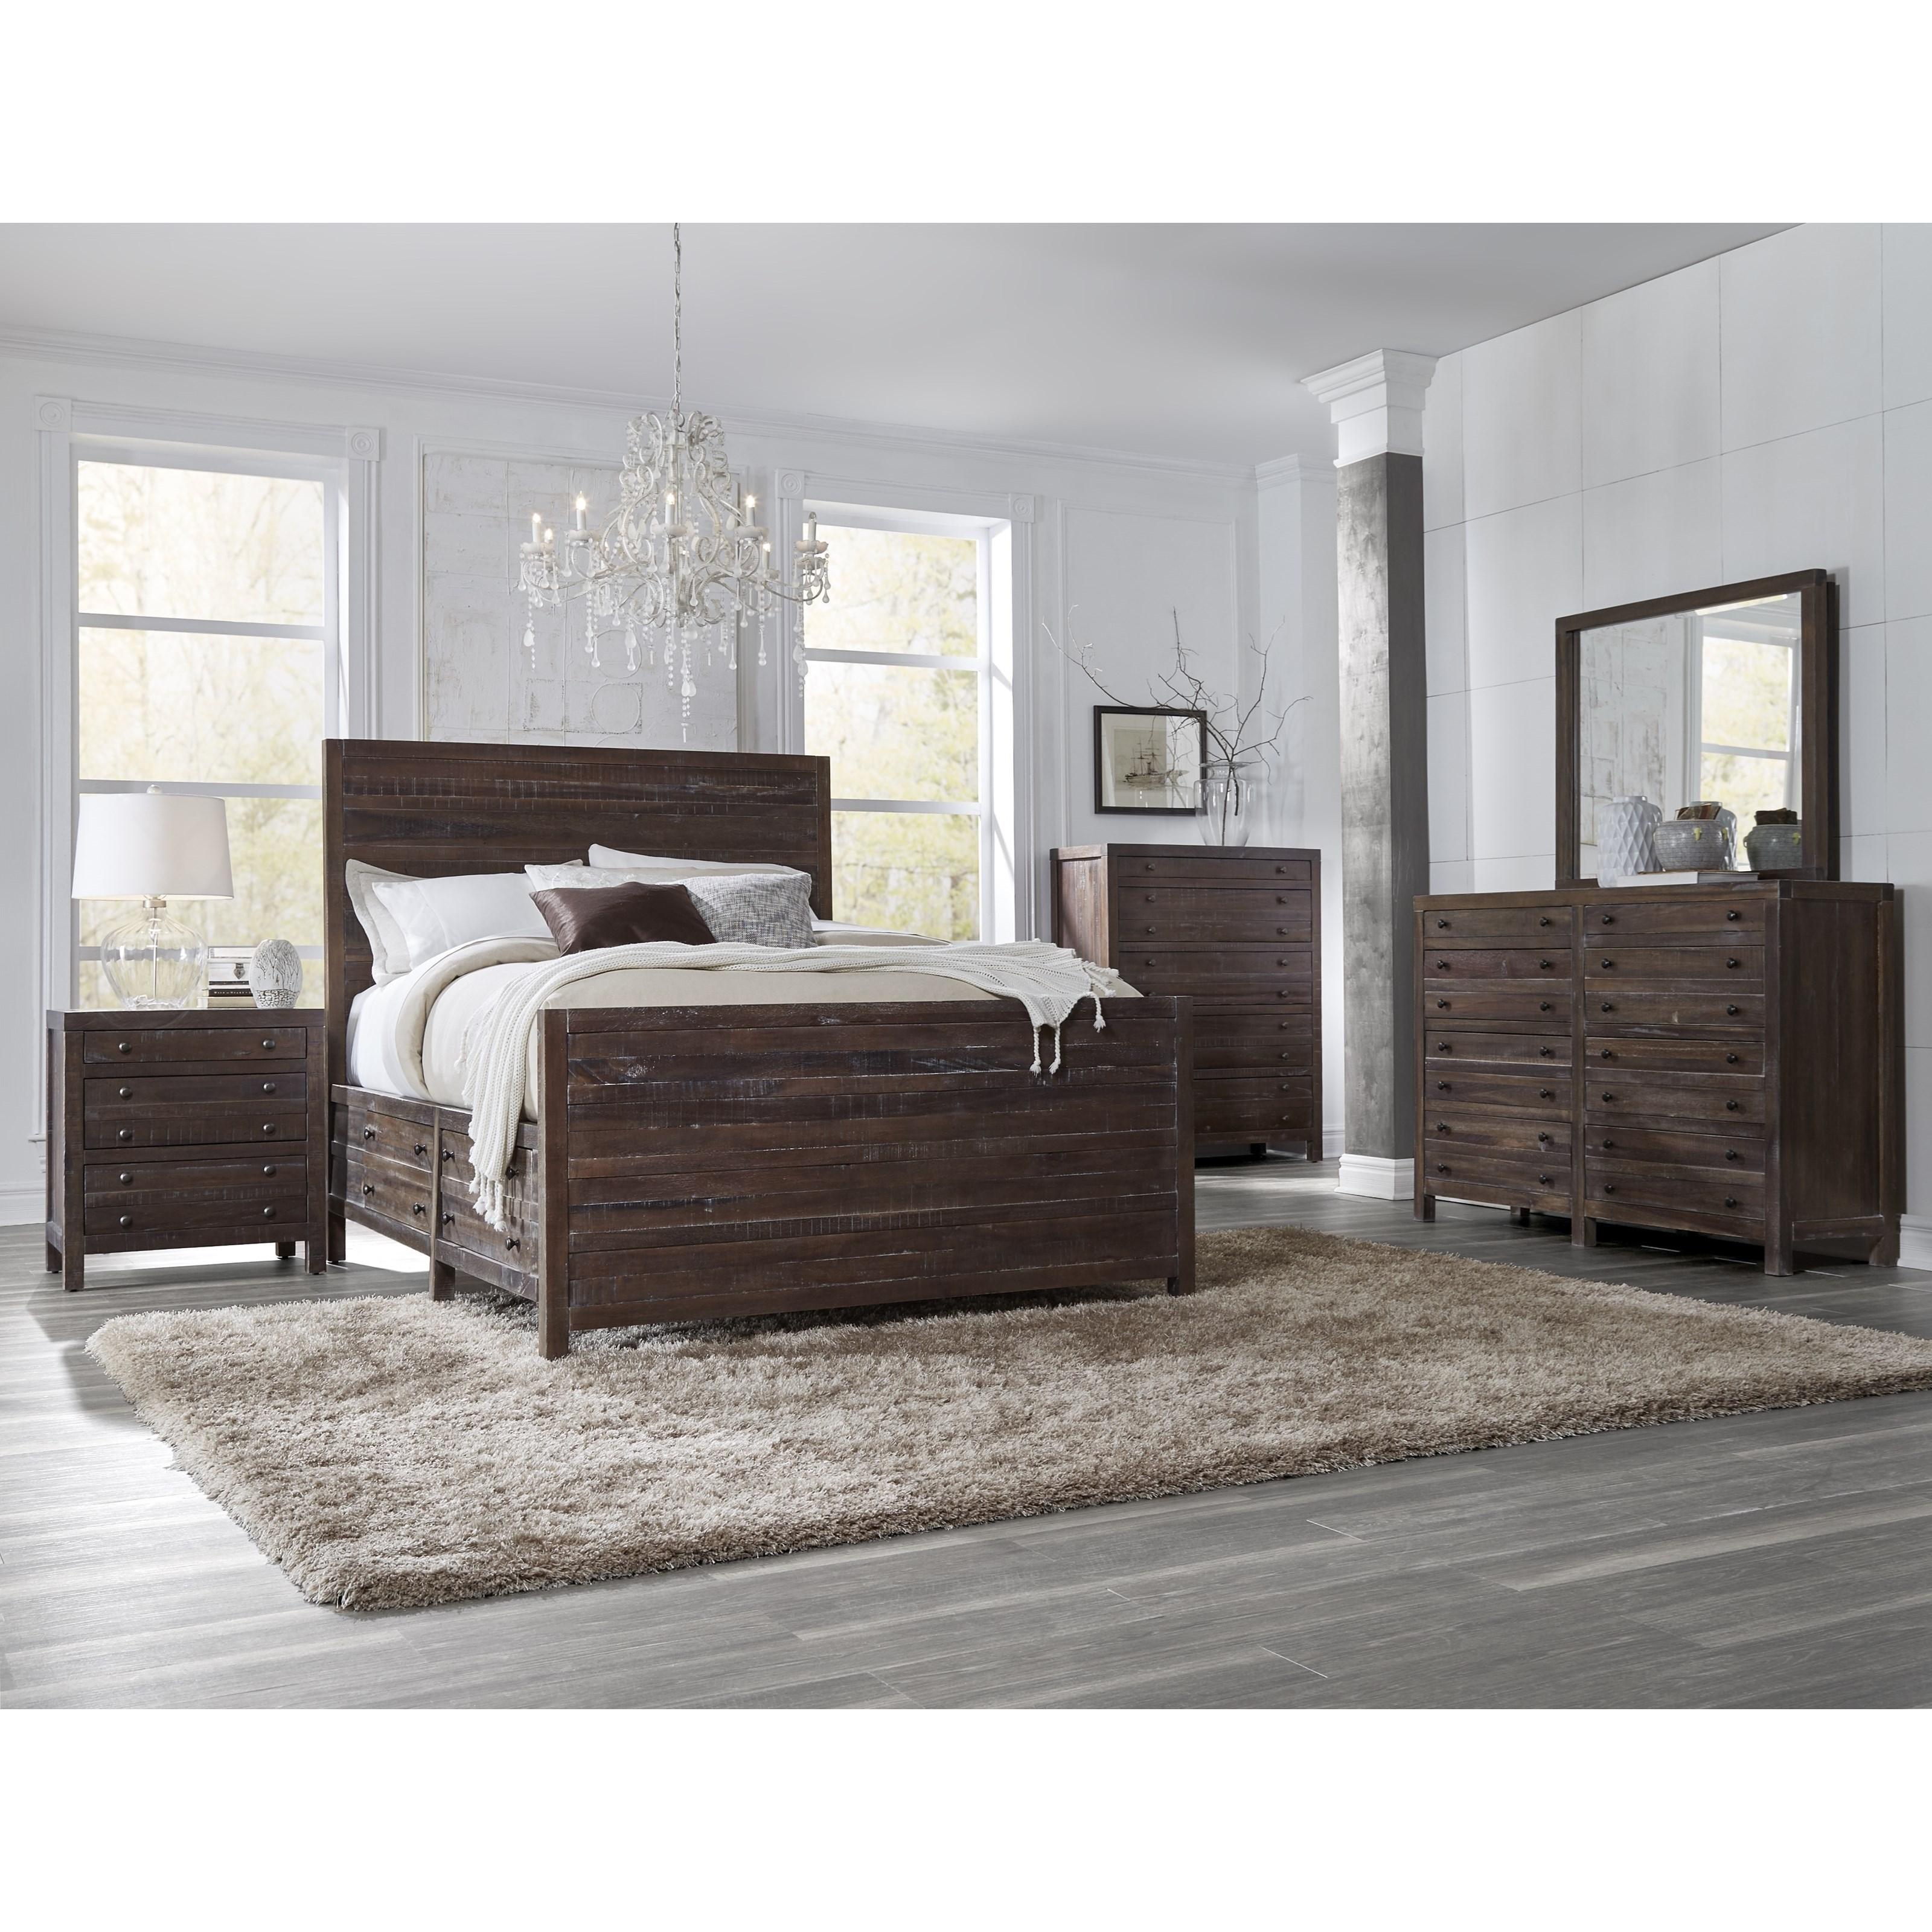 Contemporary, Rustic Storage Bedroom Set TOWNSEND 8T06D7-NDMC-5PC in Java 